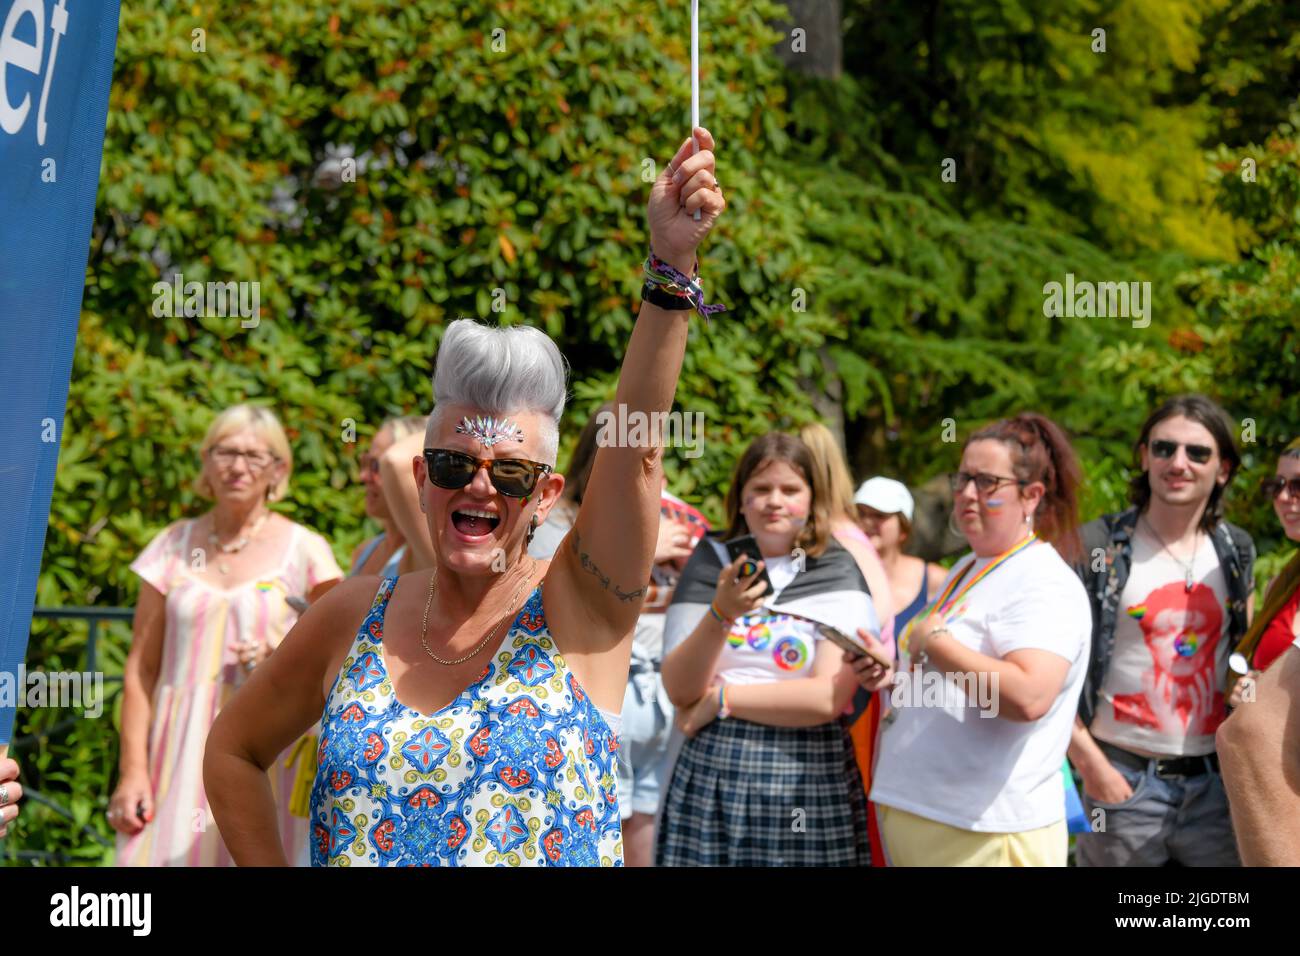 Bournemouth, UK. Saturday 9 July 2022. Thousands take part in a colourful LGBT Pride parade in central Bournemouth Credit: Thomas Faull/Alamy Live News Stock Photo